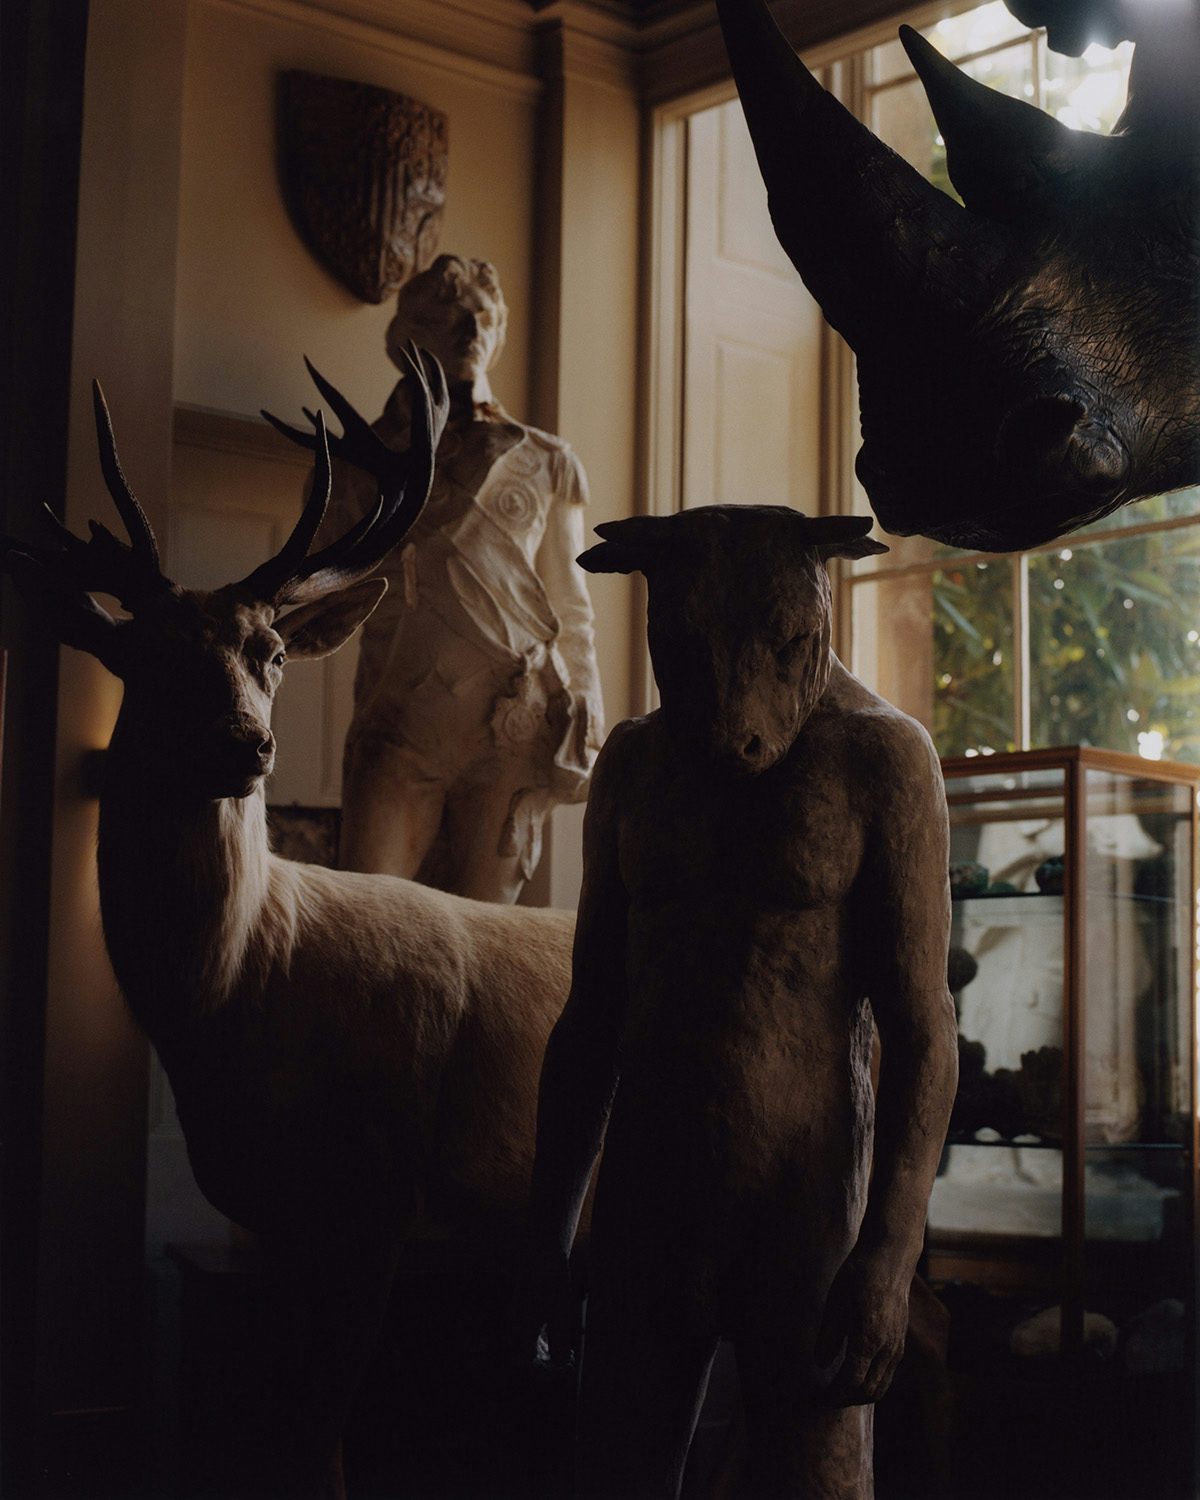 Photograph taken from Folly by Jamie Murray showing a taxidermy deer, rhinoceros head, and a human-like figure with an animal's head, inside a darkened neutral room